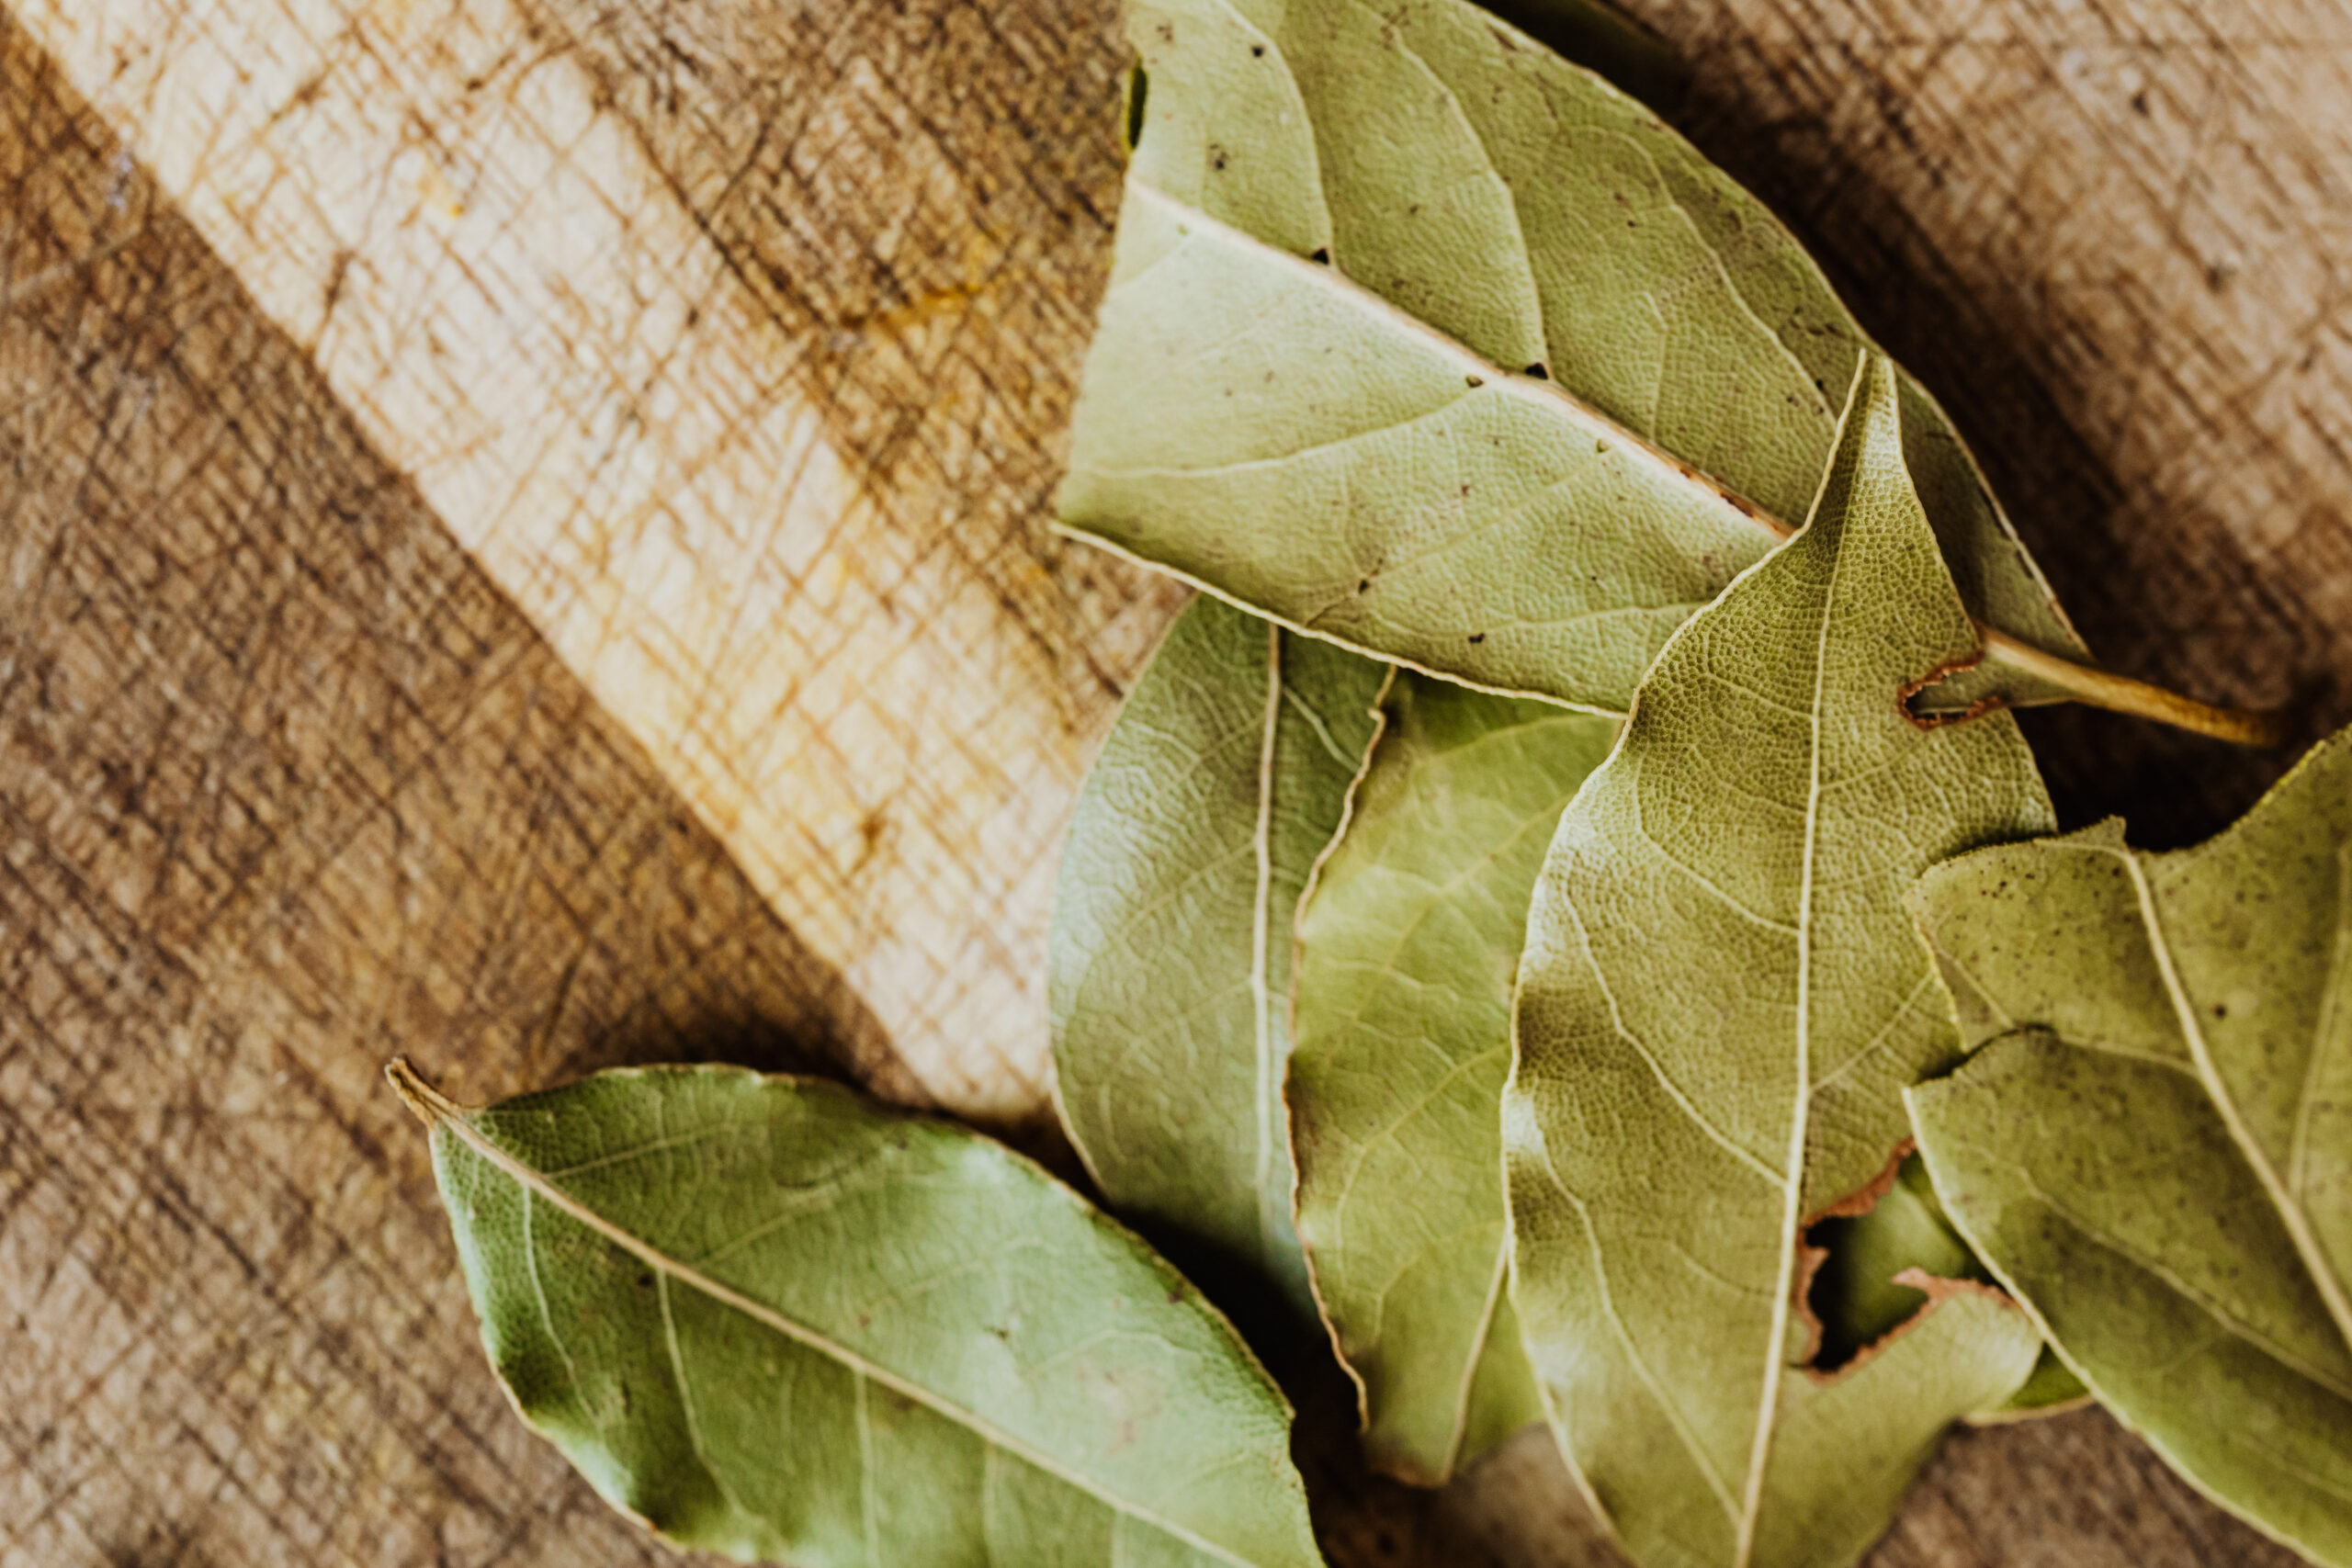 What Are Bay Leaves